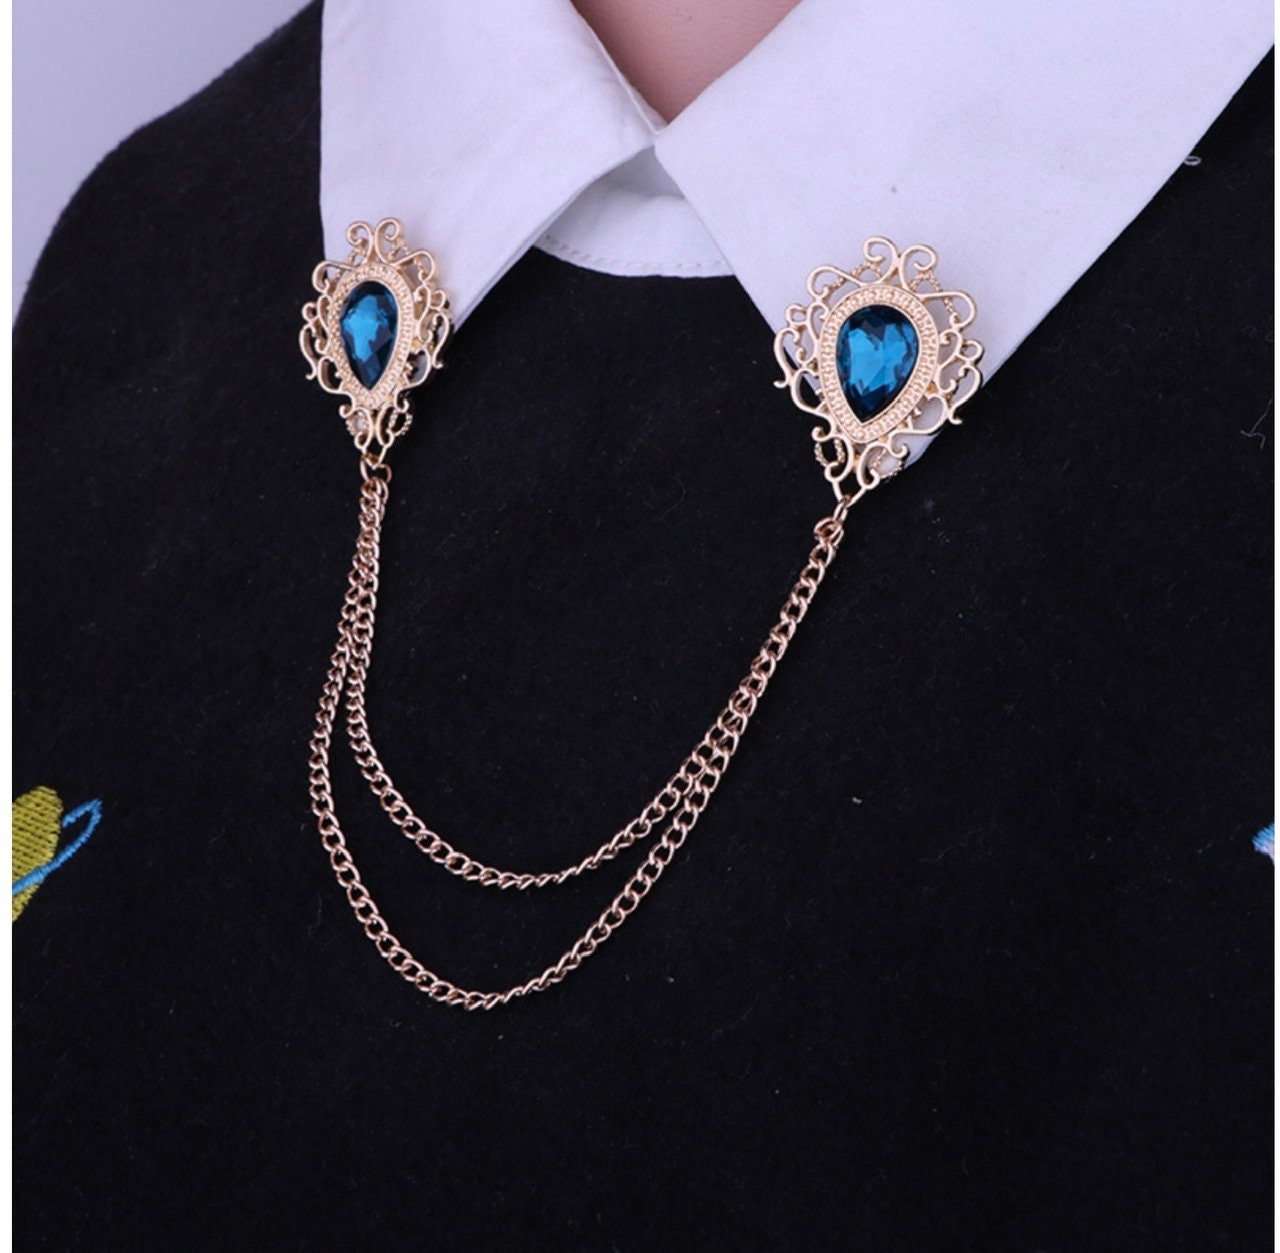 Alloy Crystal Brooches Fashion Tassel Chain Lapel Pins Shirt Suit Badge Wedding Jewelry Gifts for Men’s Accessories